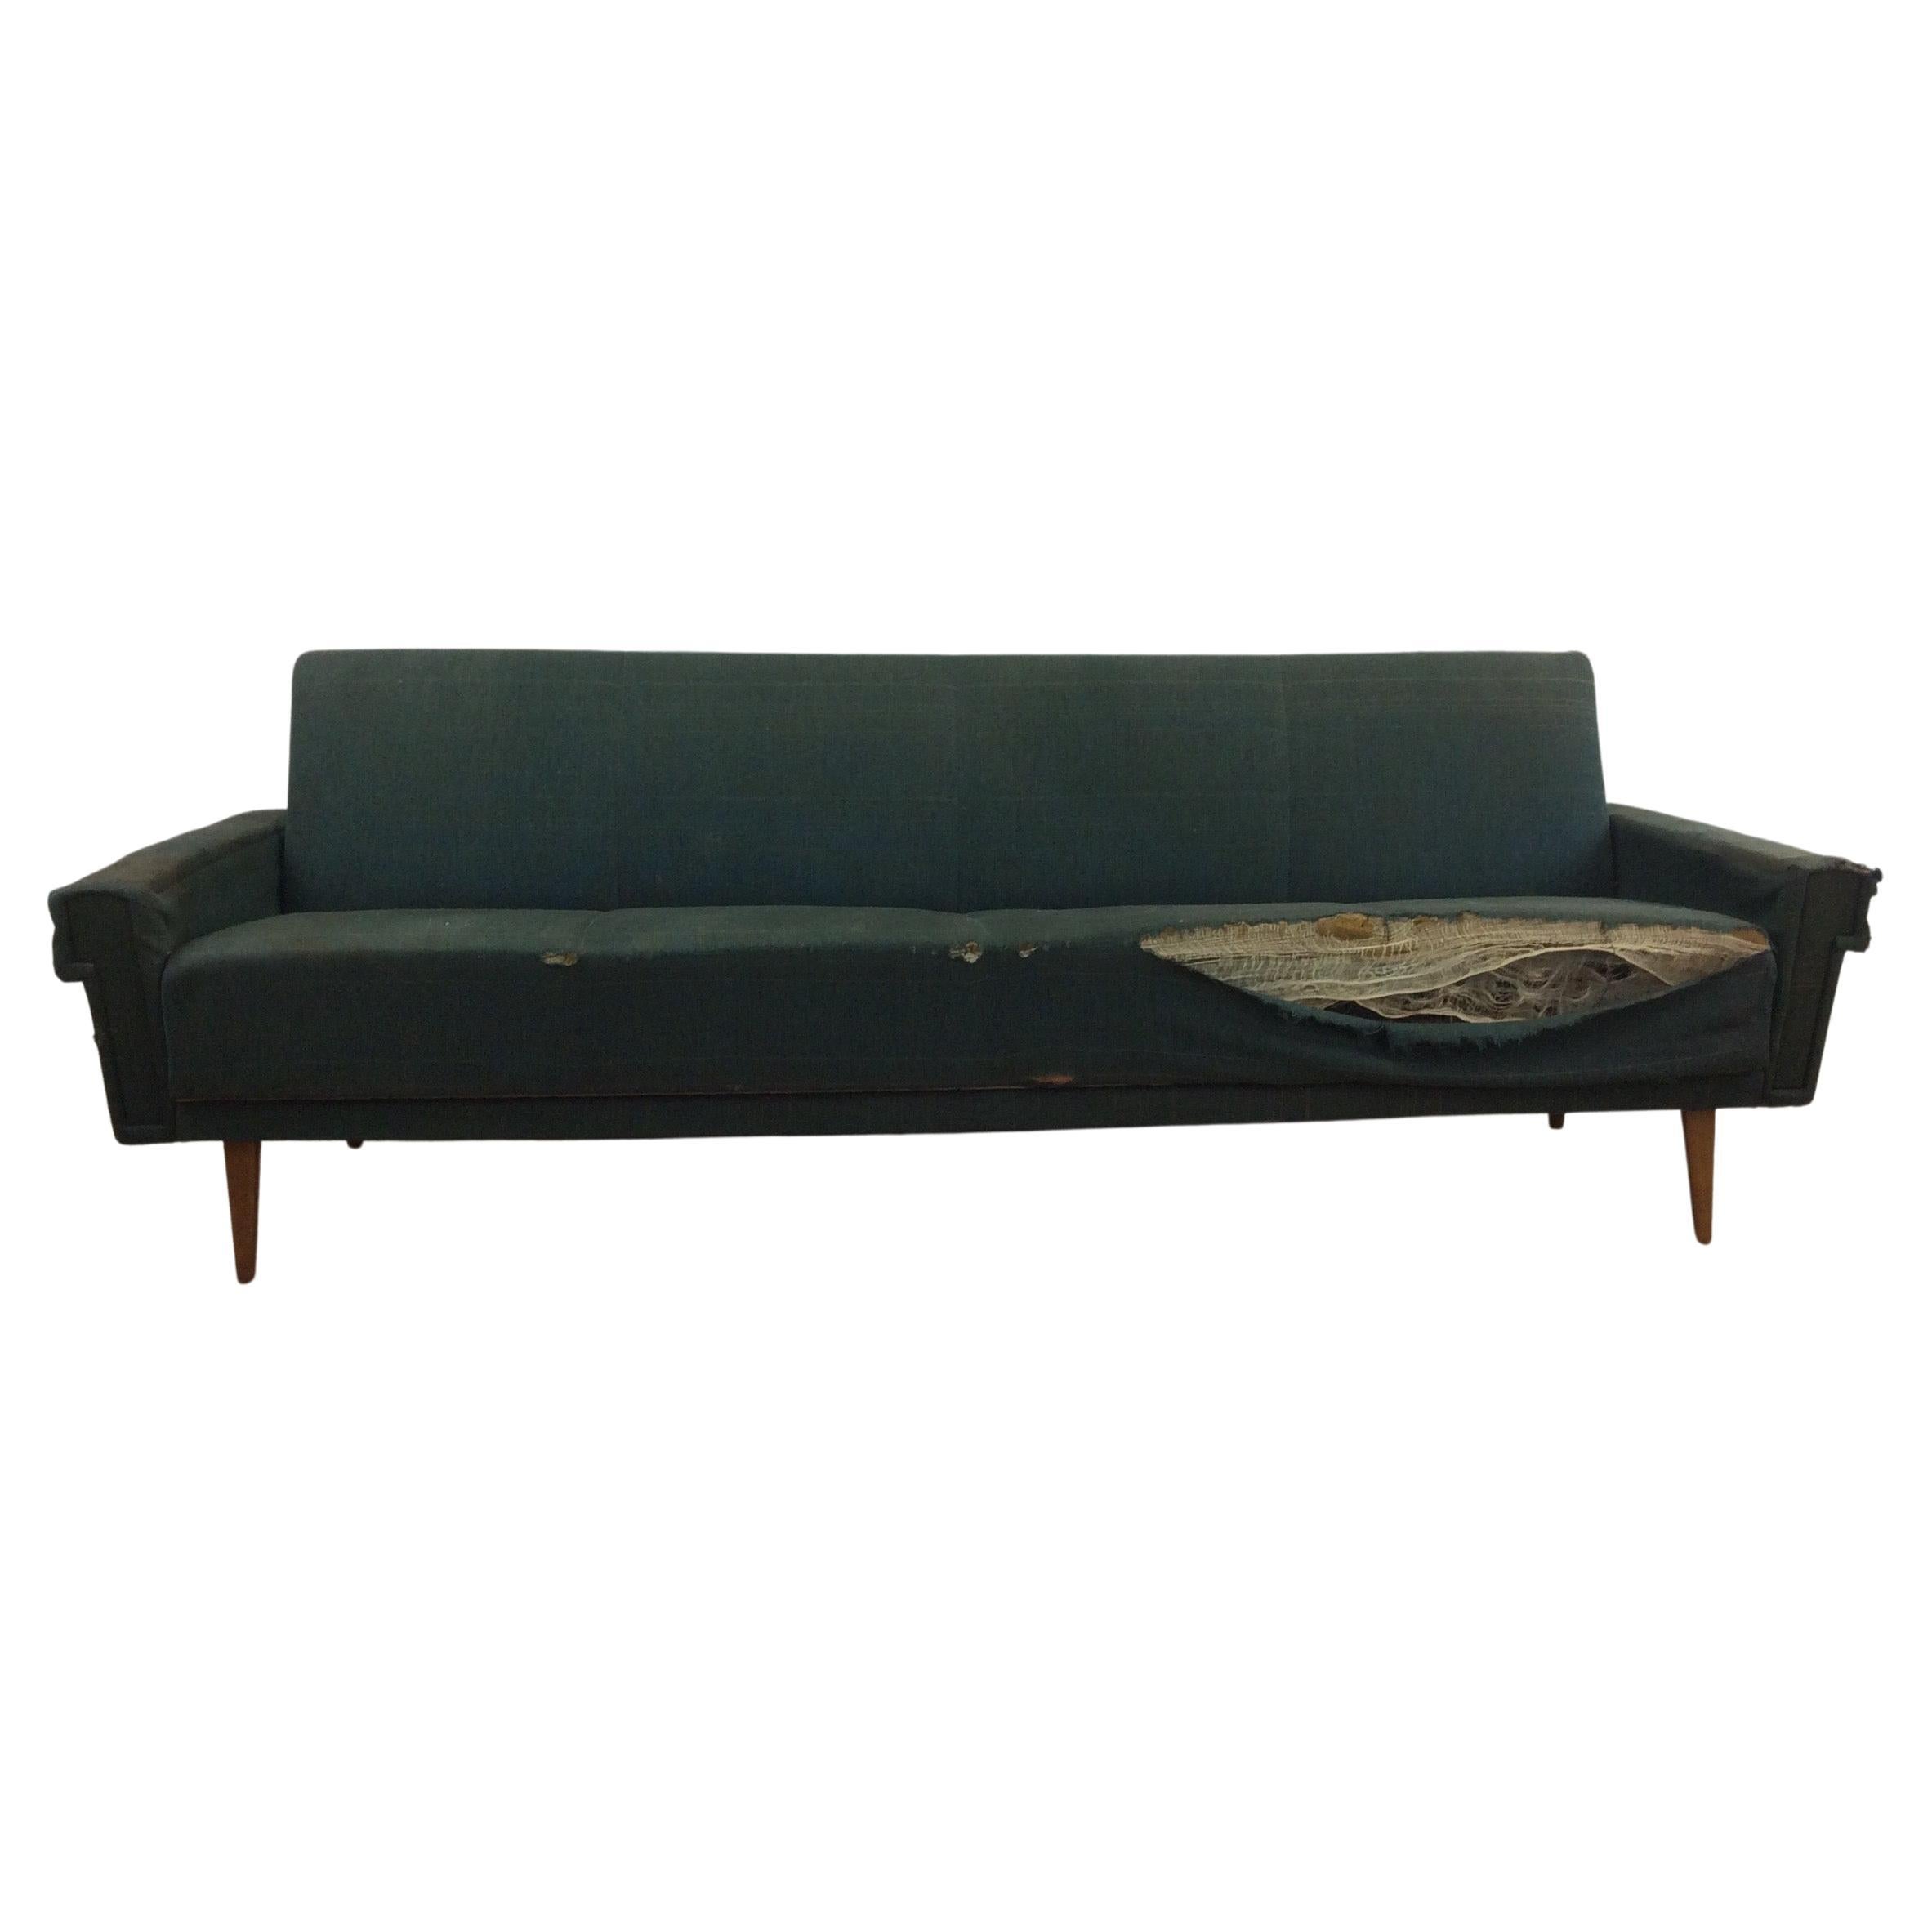 Mid-Century Modern Daybed Sleeper Sofa For Sale at 1stDibs